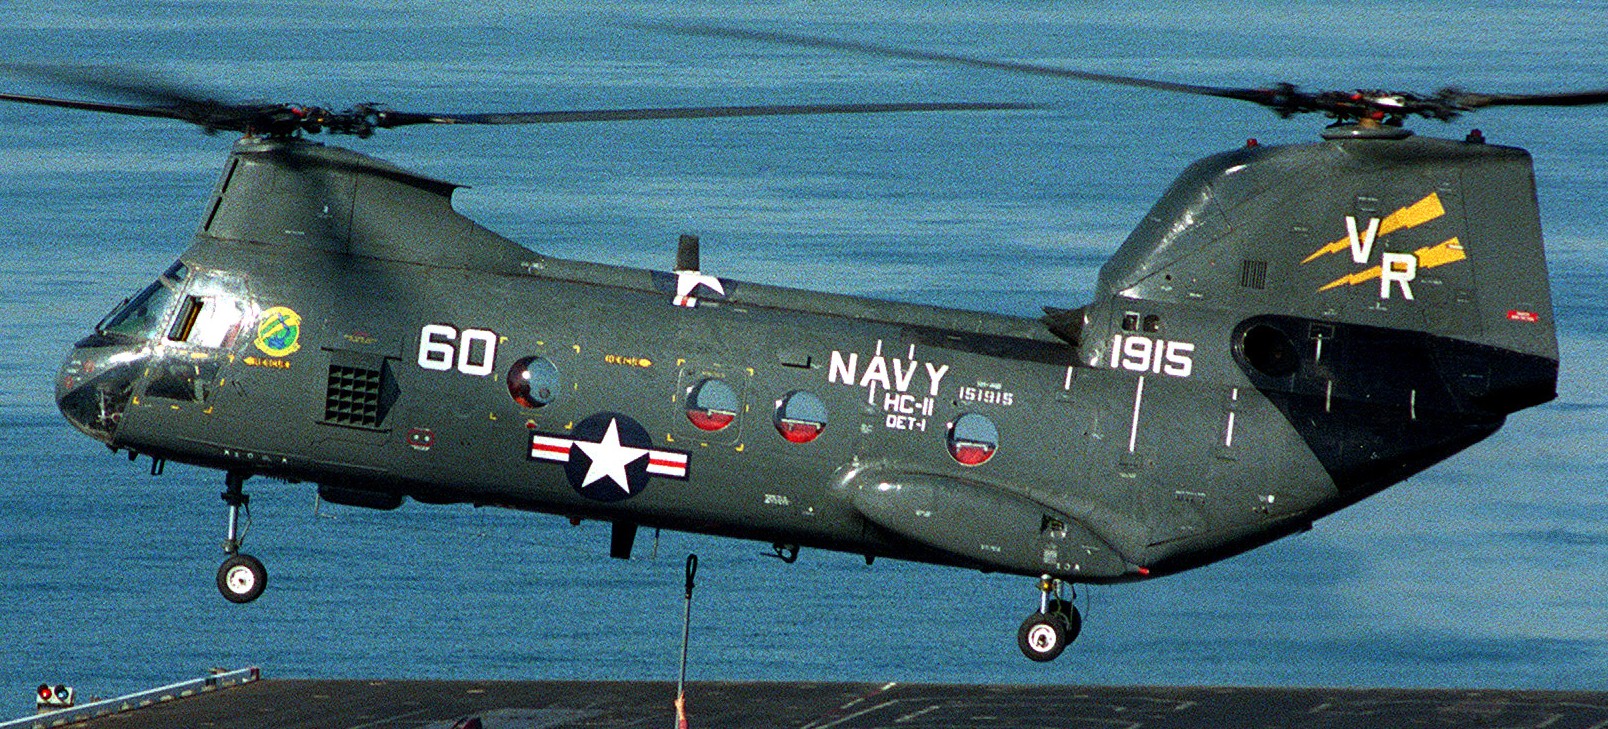 hc-11 gunbearers helicopter combat support squadron navy ch-46 sea knight 99